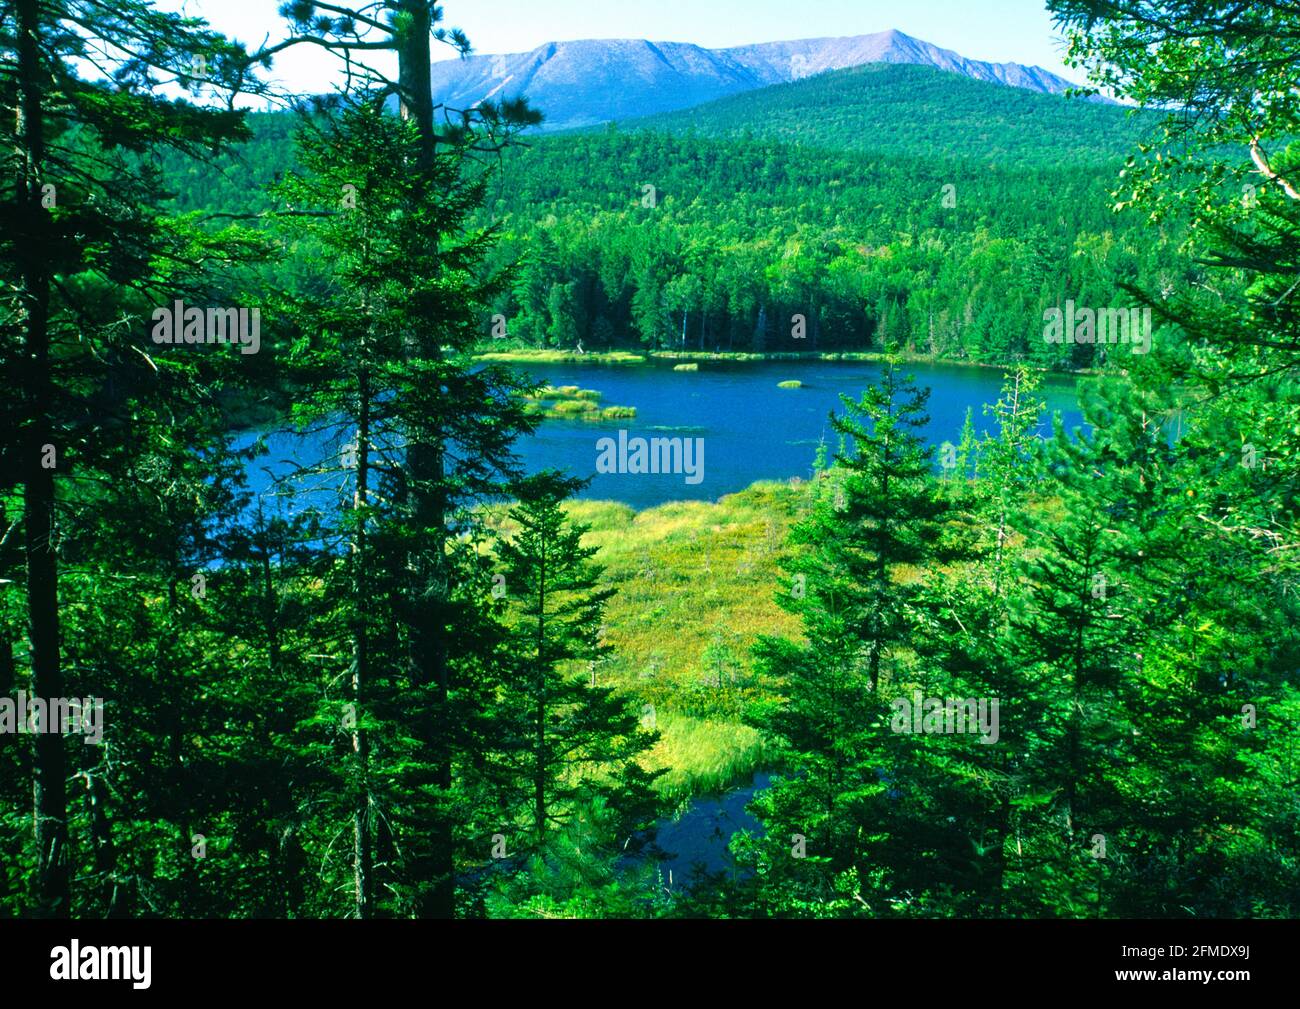 pnobscot river and mount katadin in baxter state park in maine in USA Stock Photo